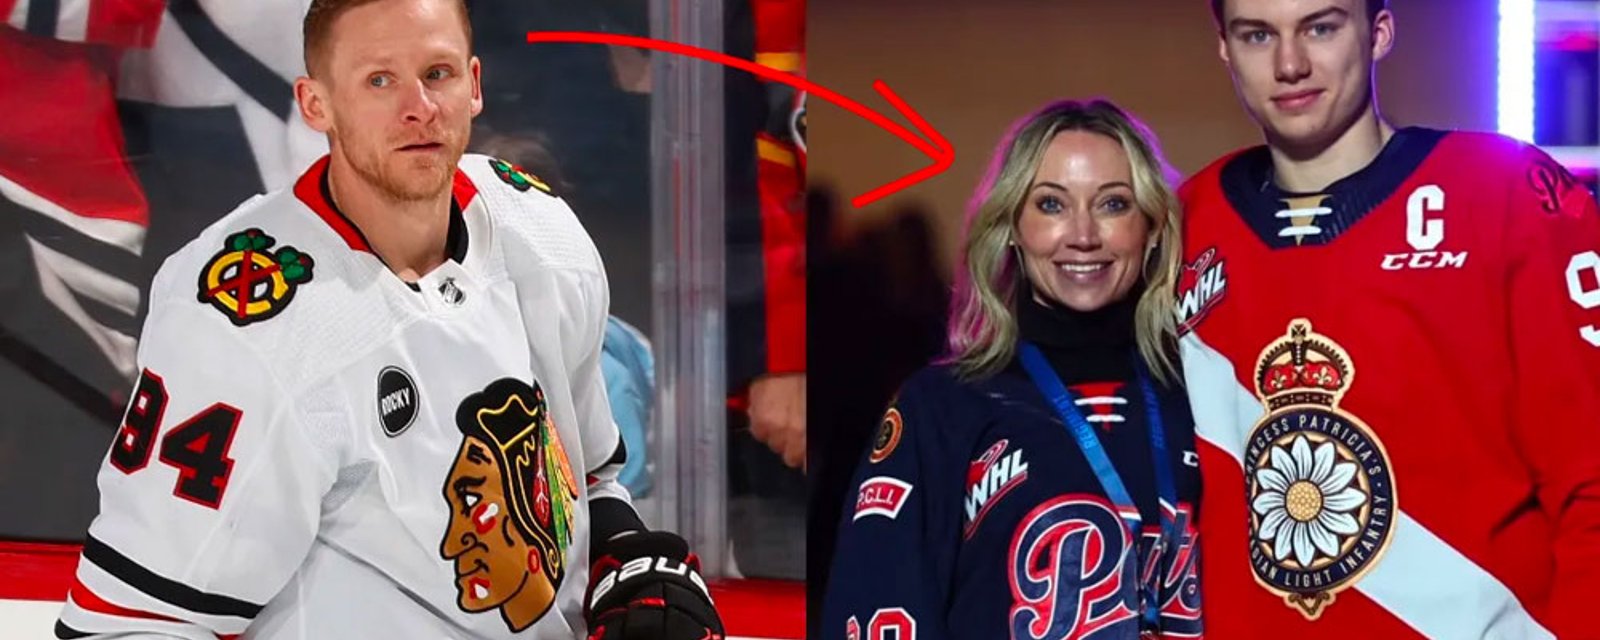 Blackhawks flat out deny that anything happened between Corey Perry and Melanie Bedard